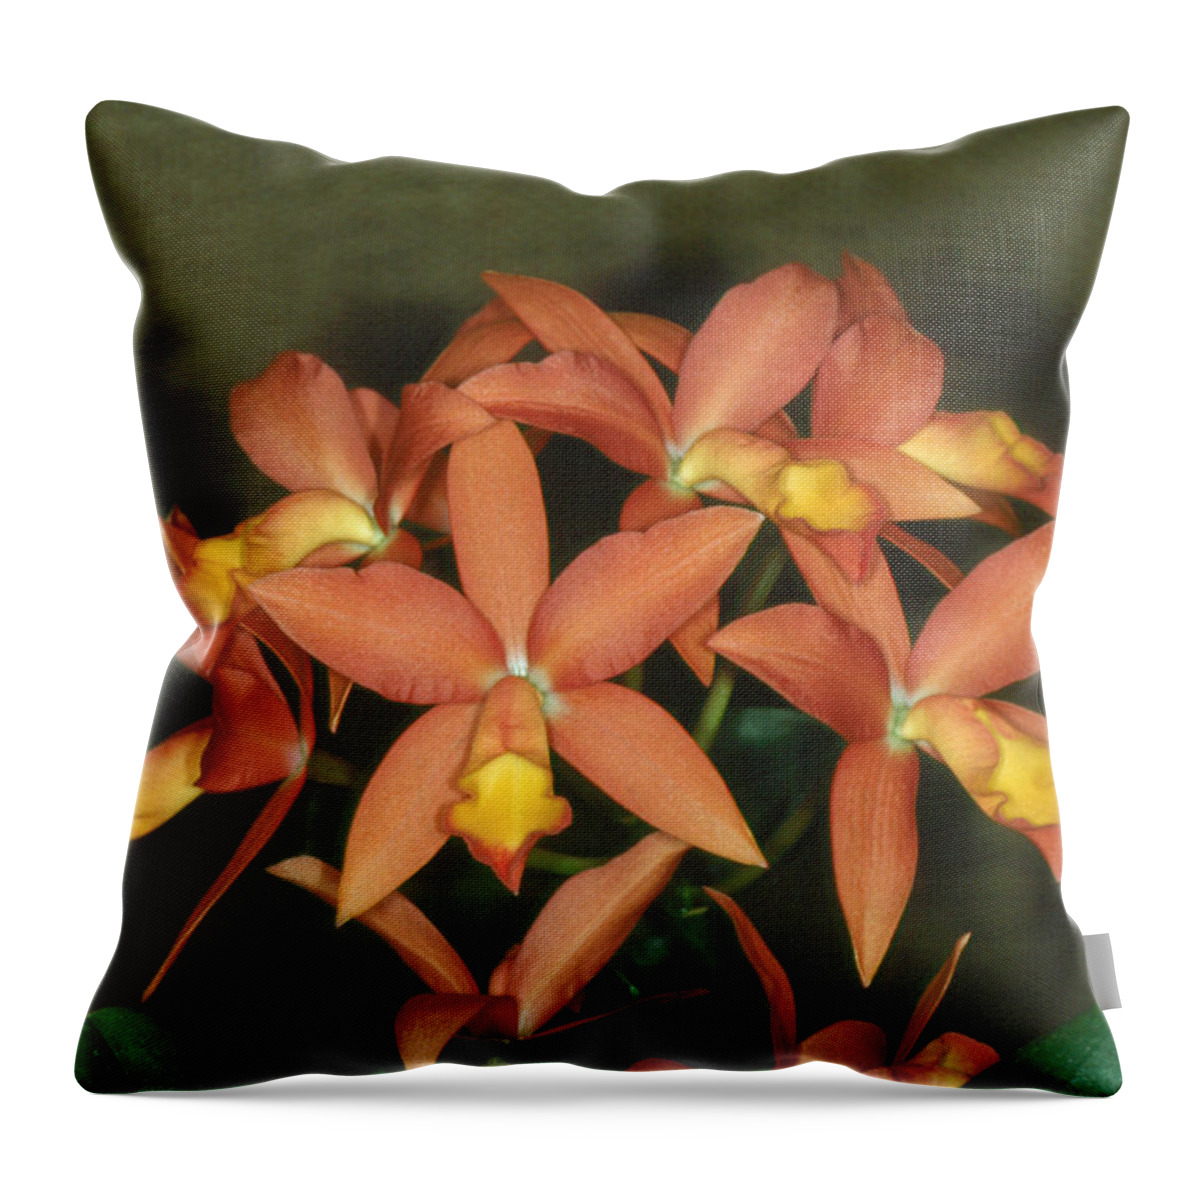 Flower Throw Pillow featuring the photograph Orchid 3 by Andy Shomock